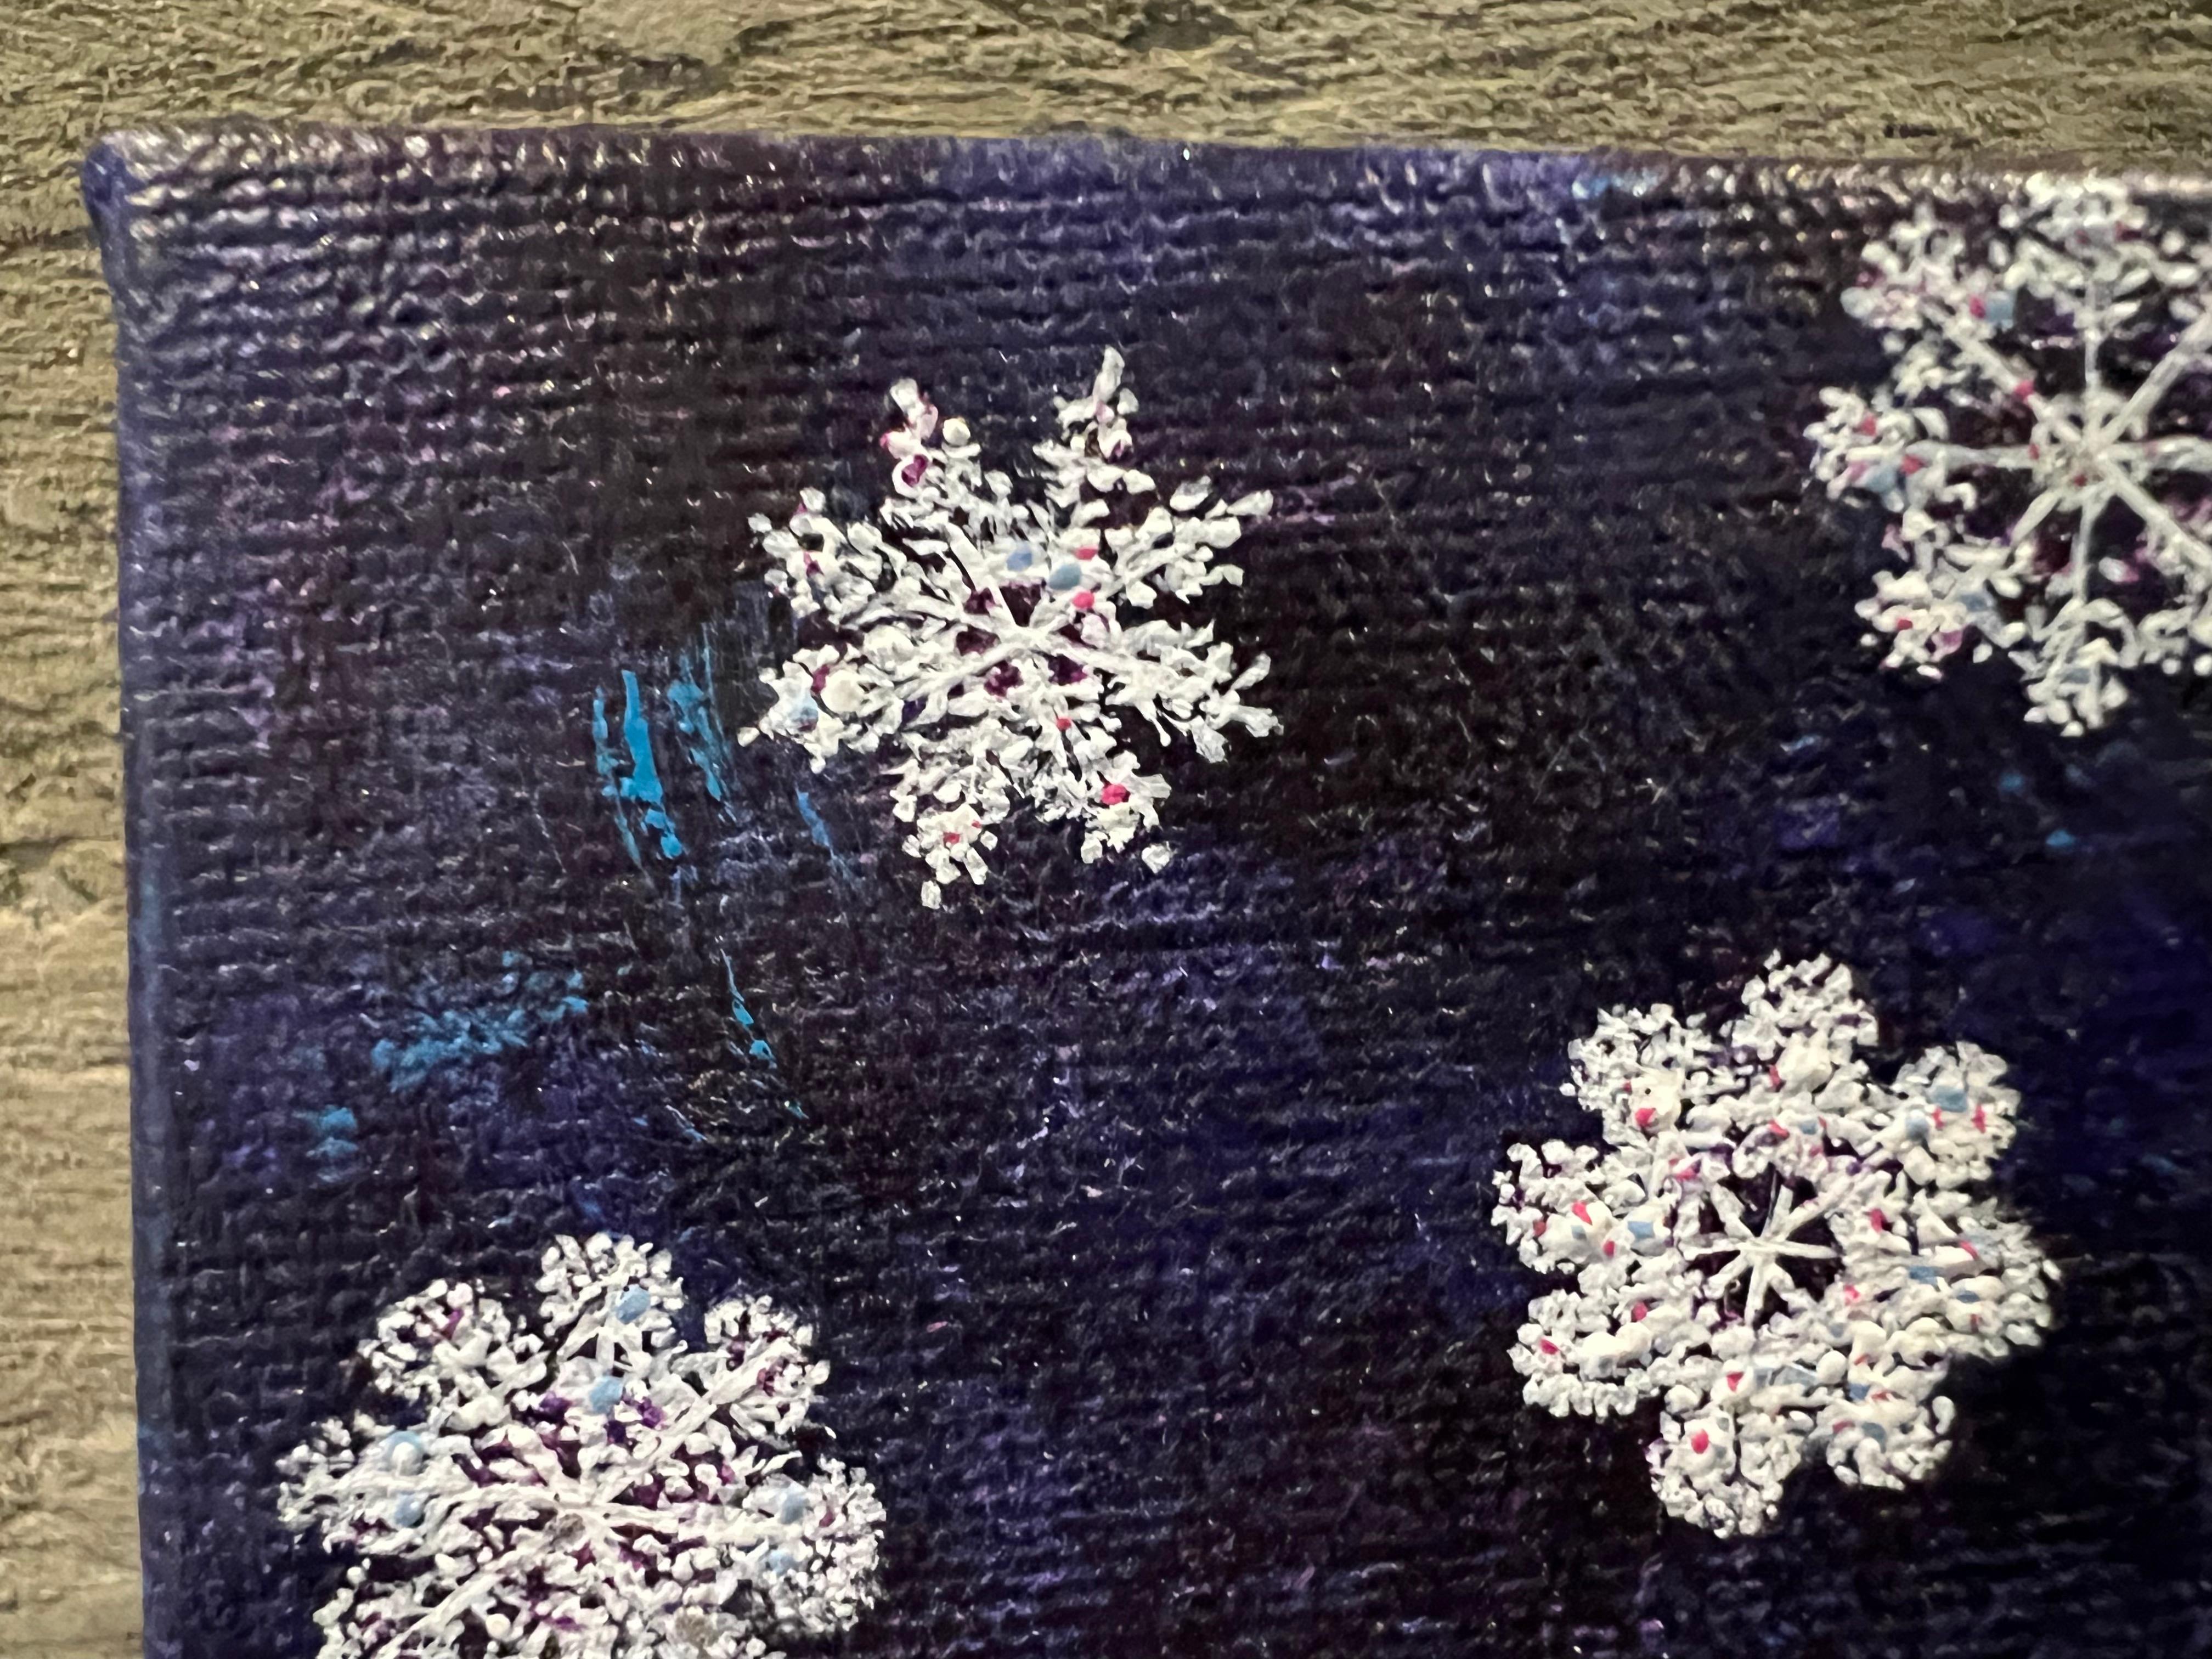 So little with so much to say. Discover the charm of this petite painting that speaks volumes. Intricate snowflakes glisten softly against a serene winter night sky. It's beauty lies in the highly delicate details within each unique snowflake. Using